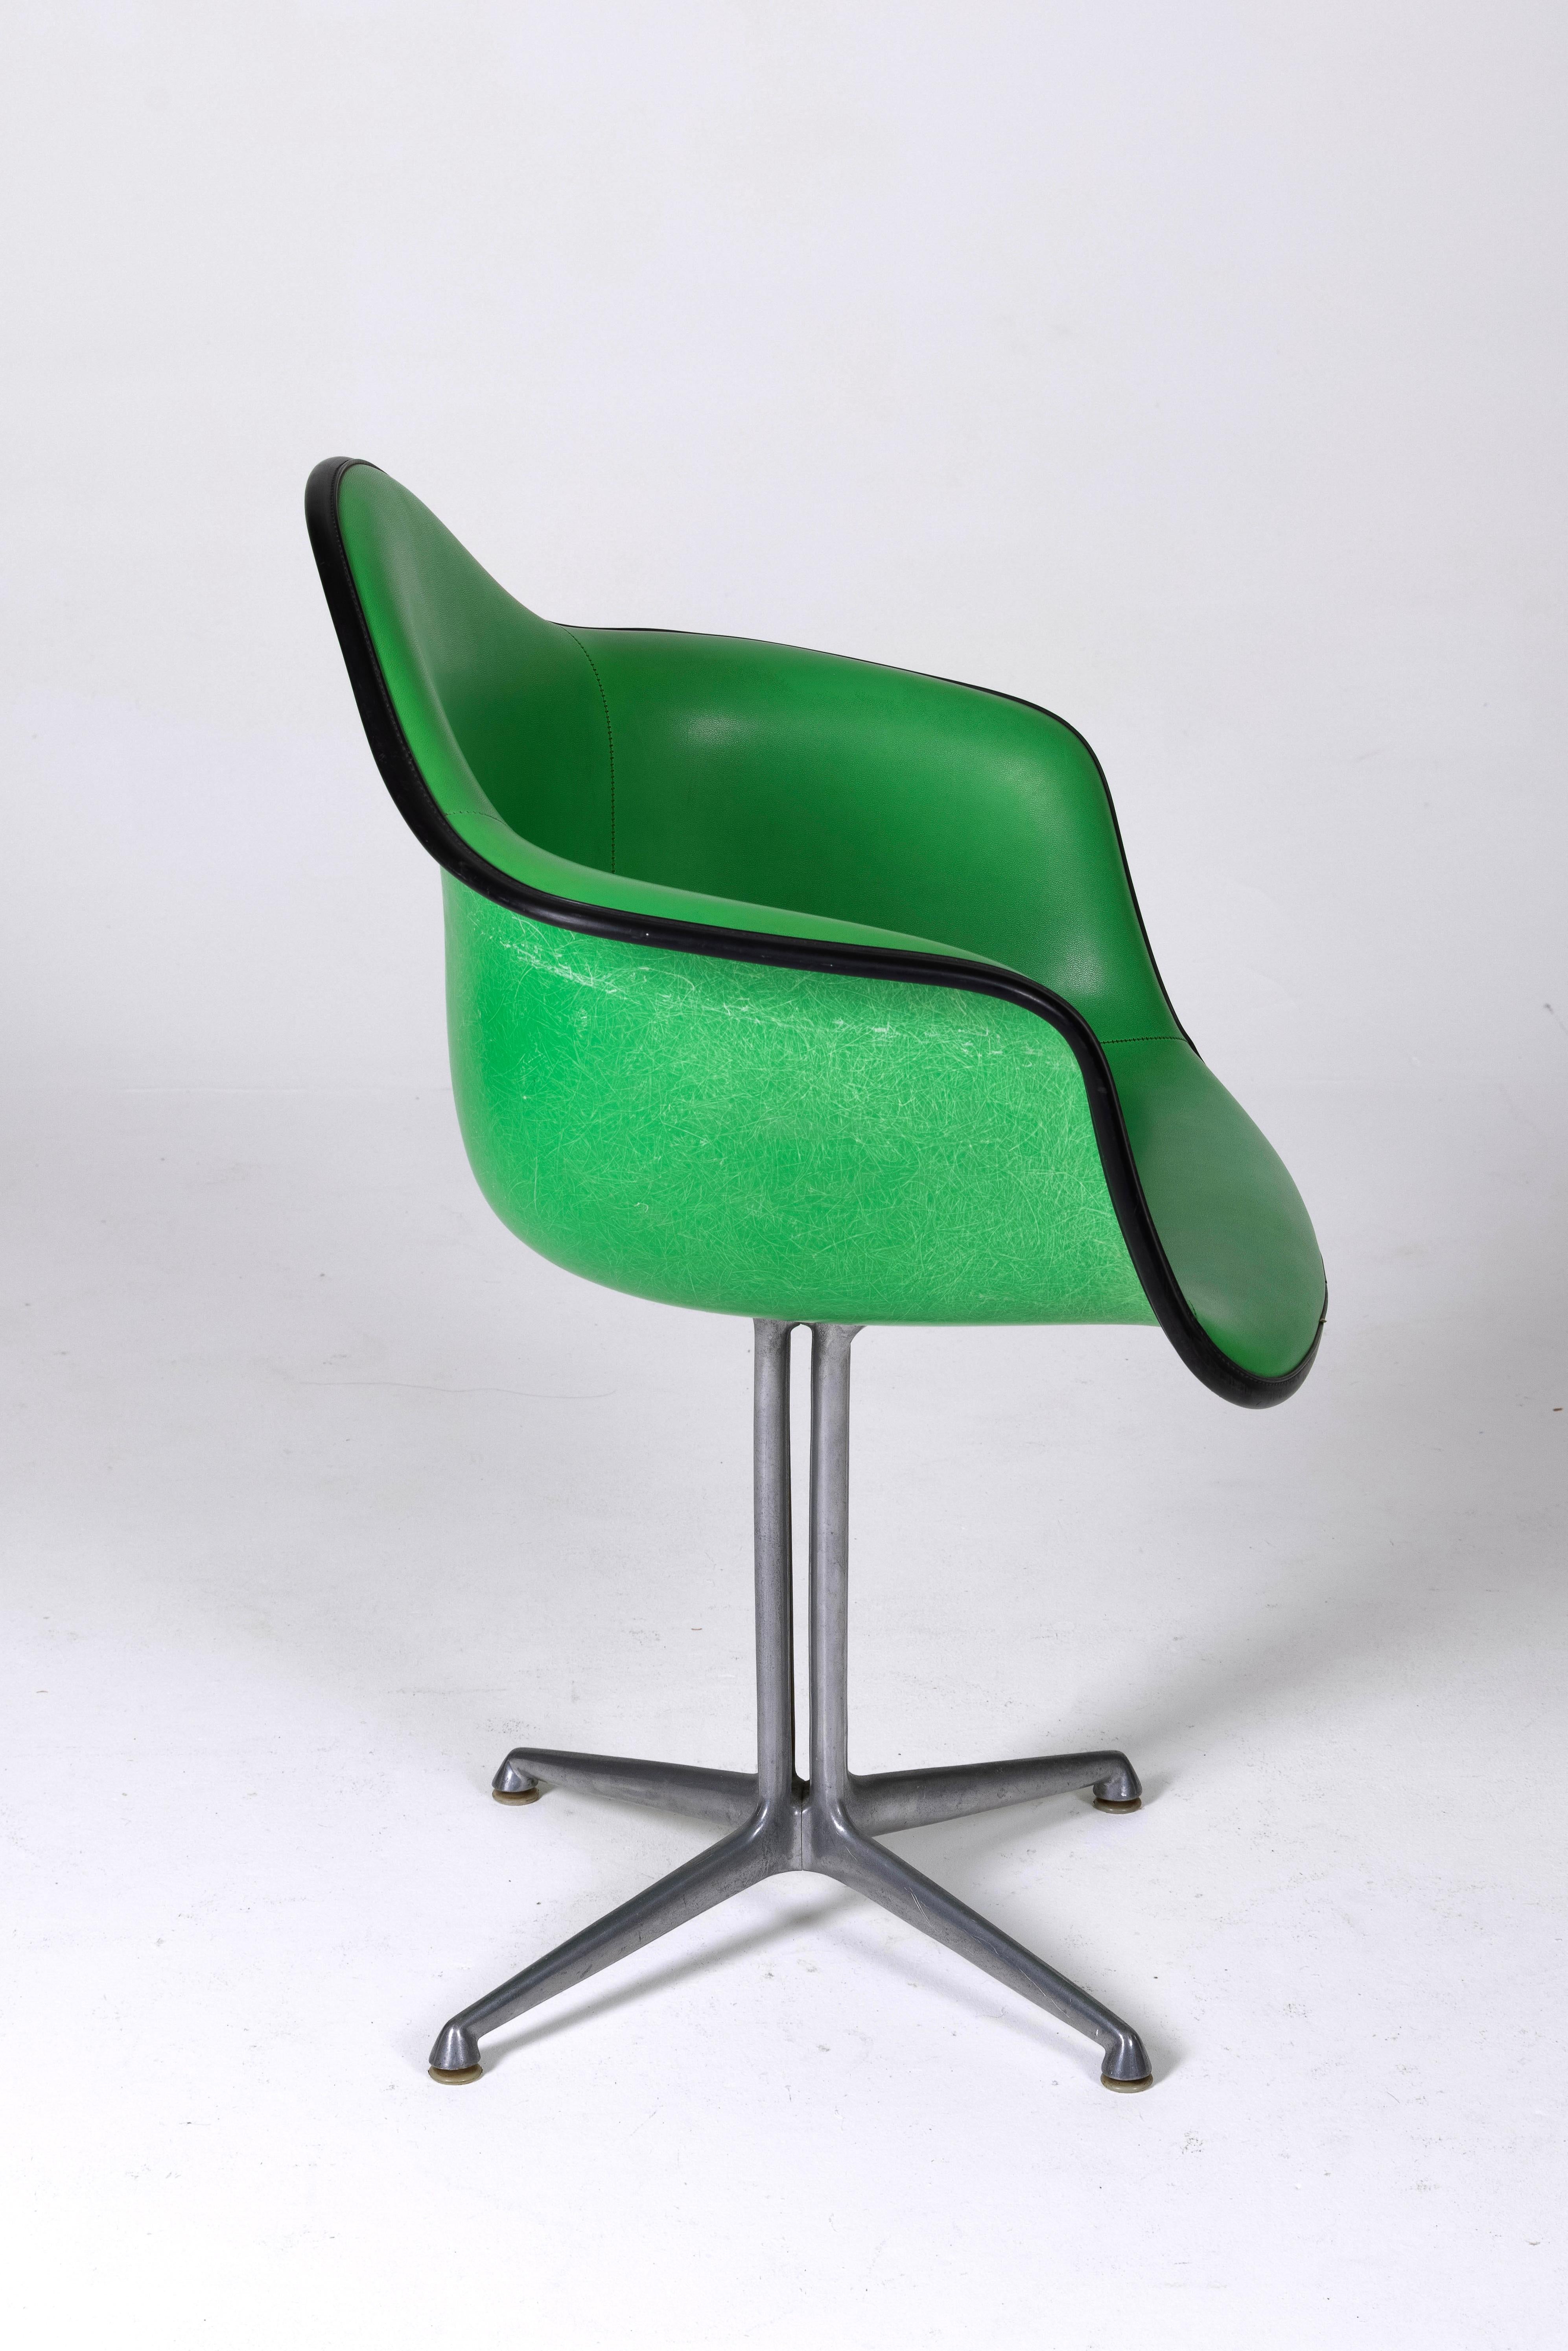 Charles and Ray Eames' Eames Plastic leather armchair. 3